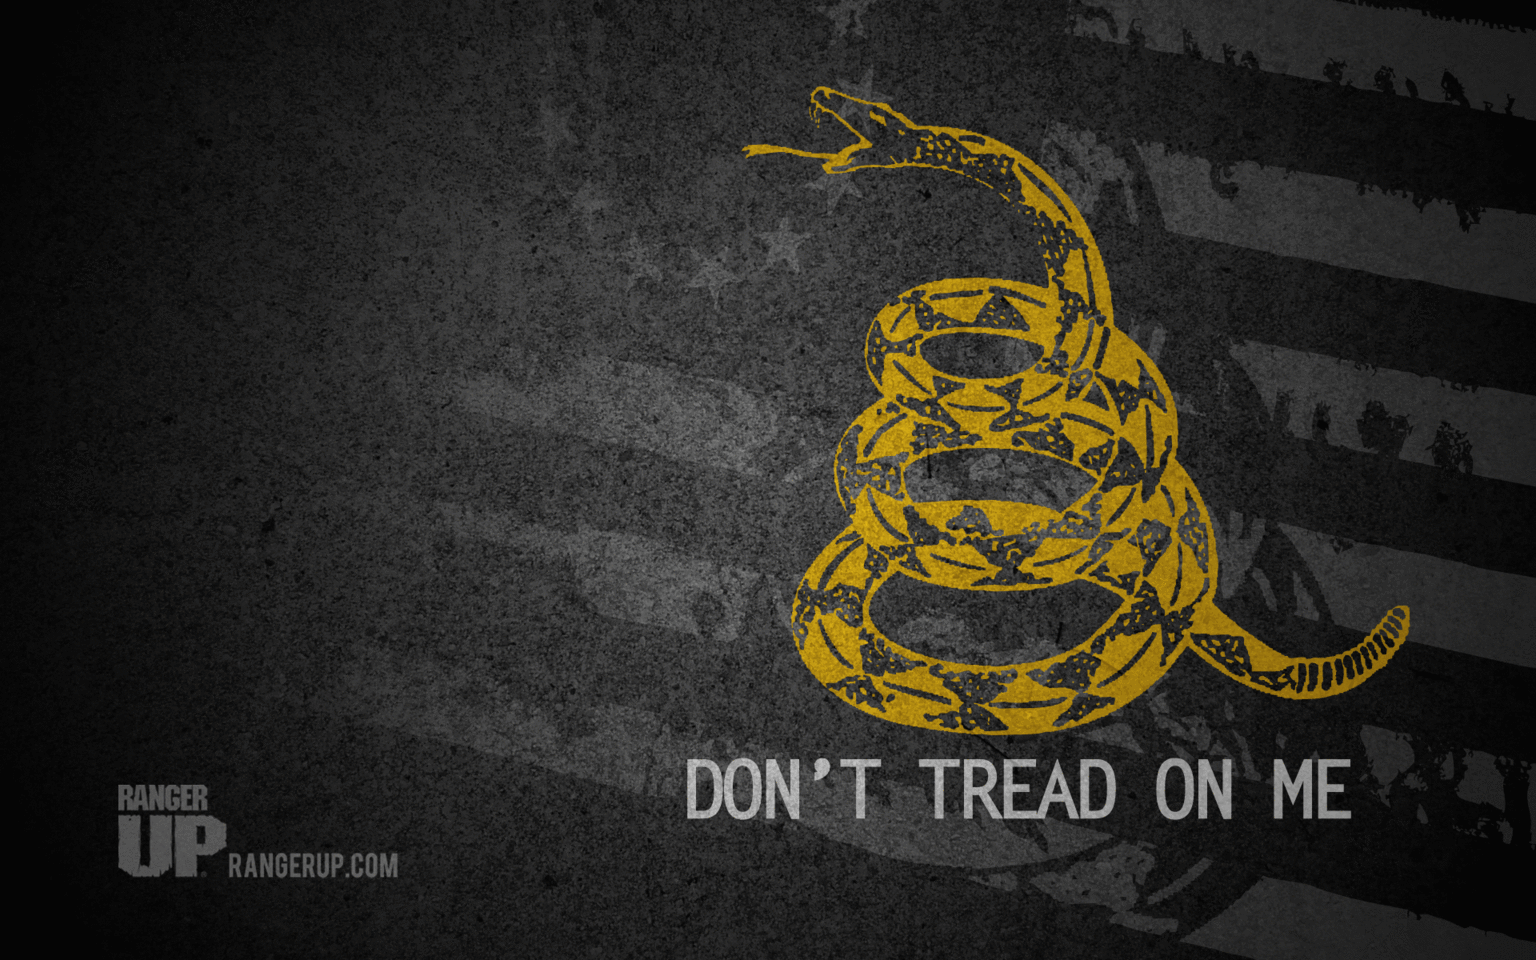 NEW Wallpapers – Don&Tread on Me Shirt